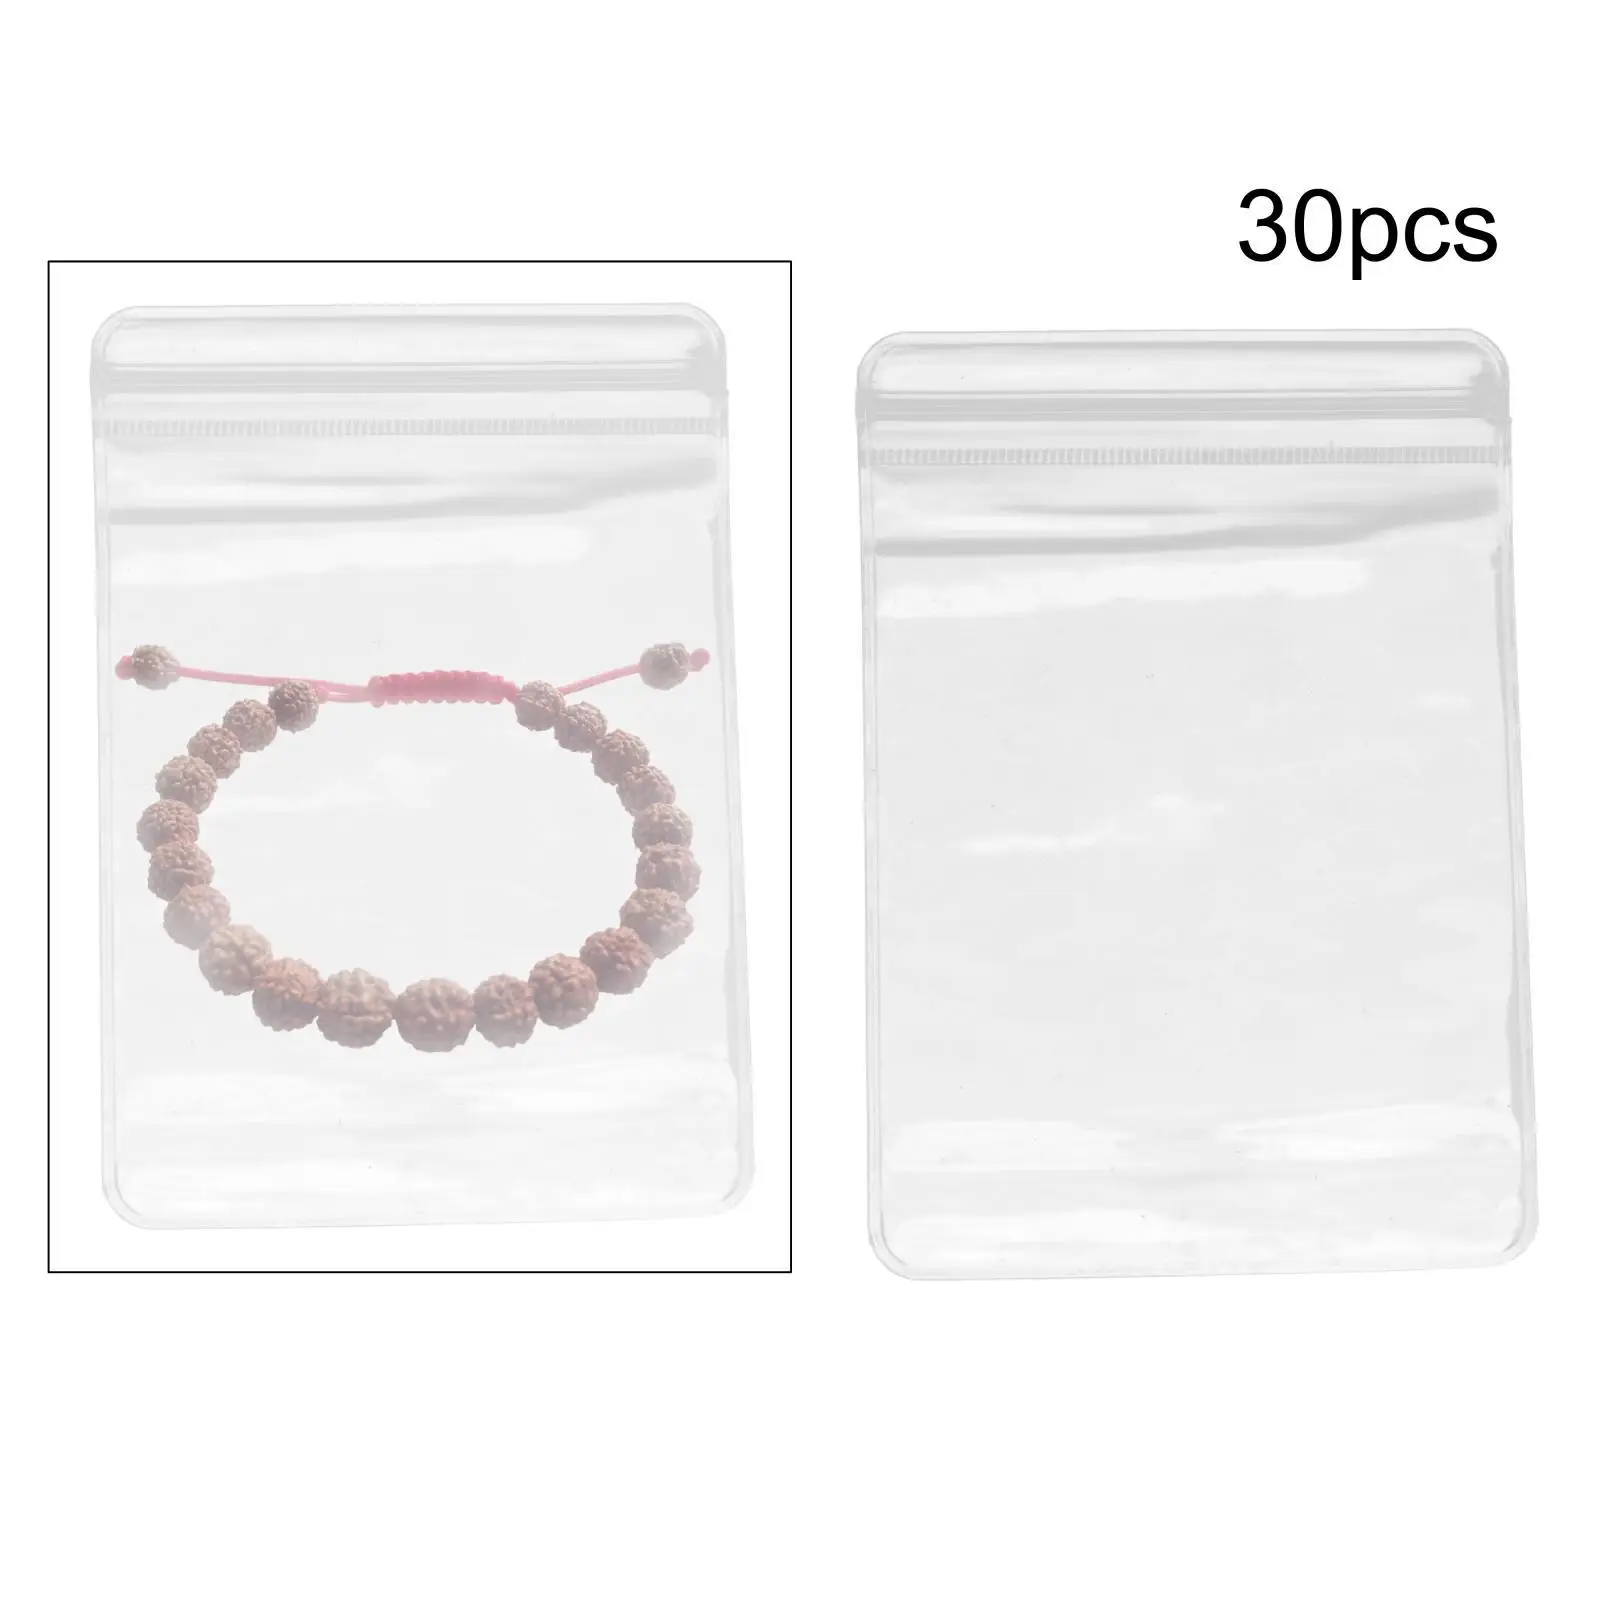 30Pcs Jewelry Storage Bags Convenient Clear PVC Reusable Organizer for Holding Jewelry Necklace Bracelet Rings Shipping